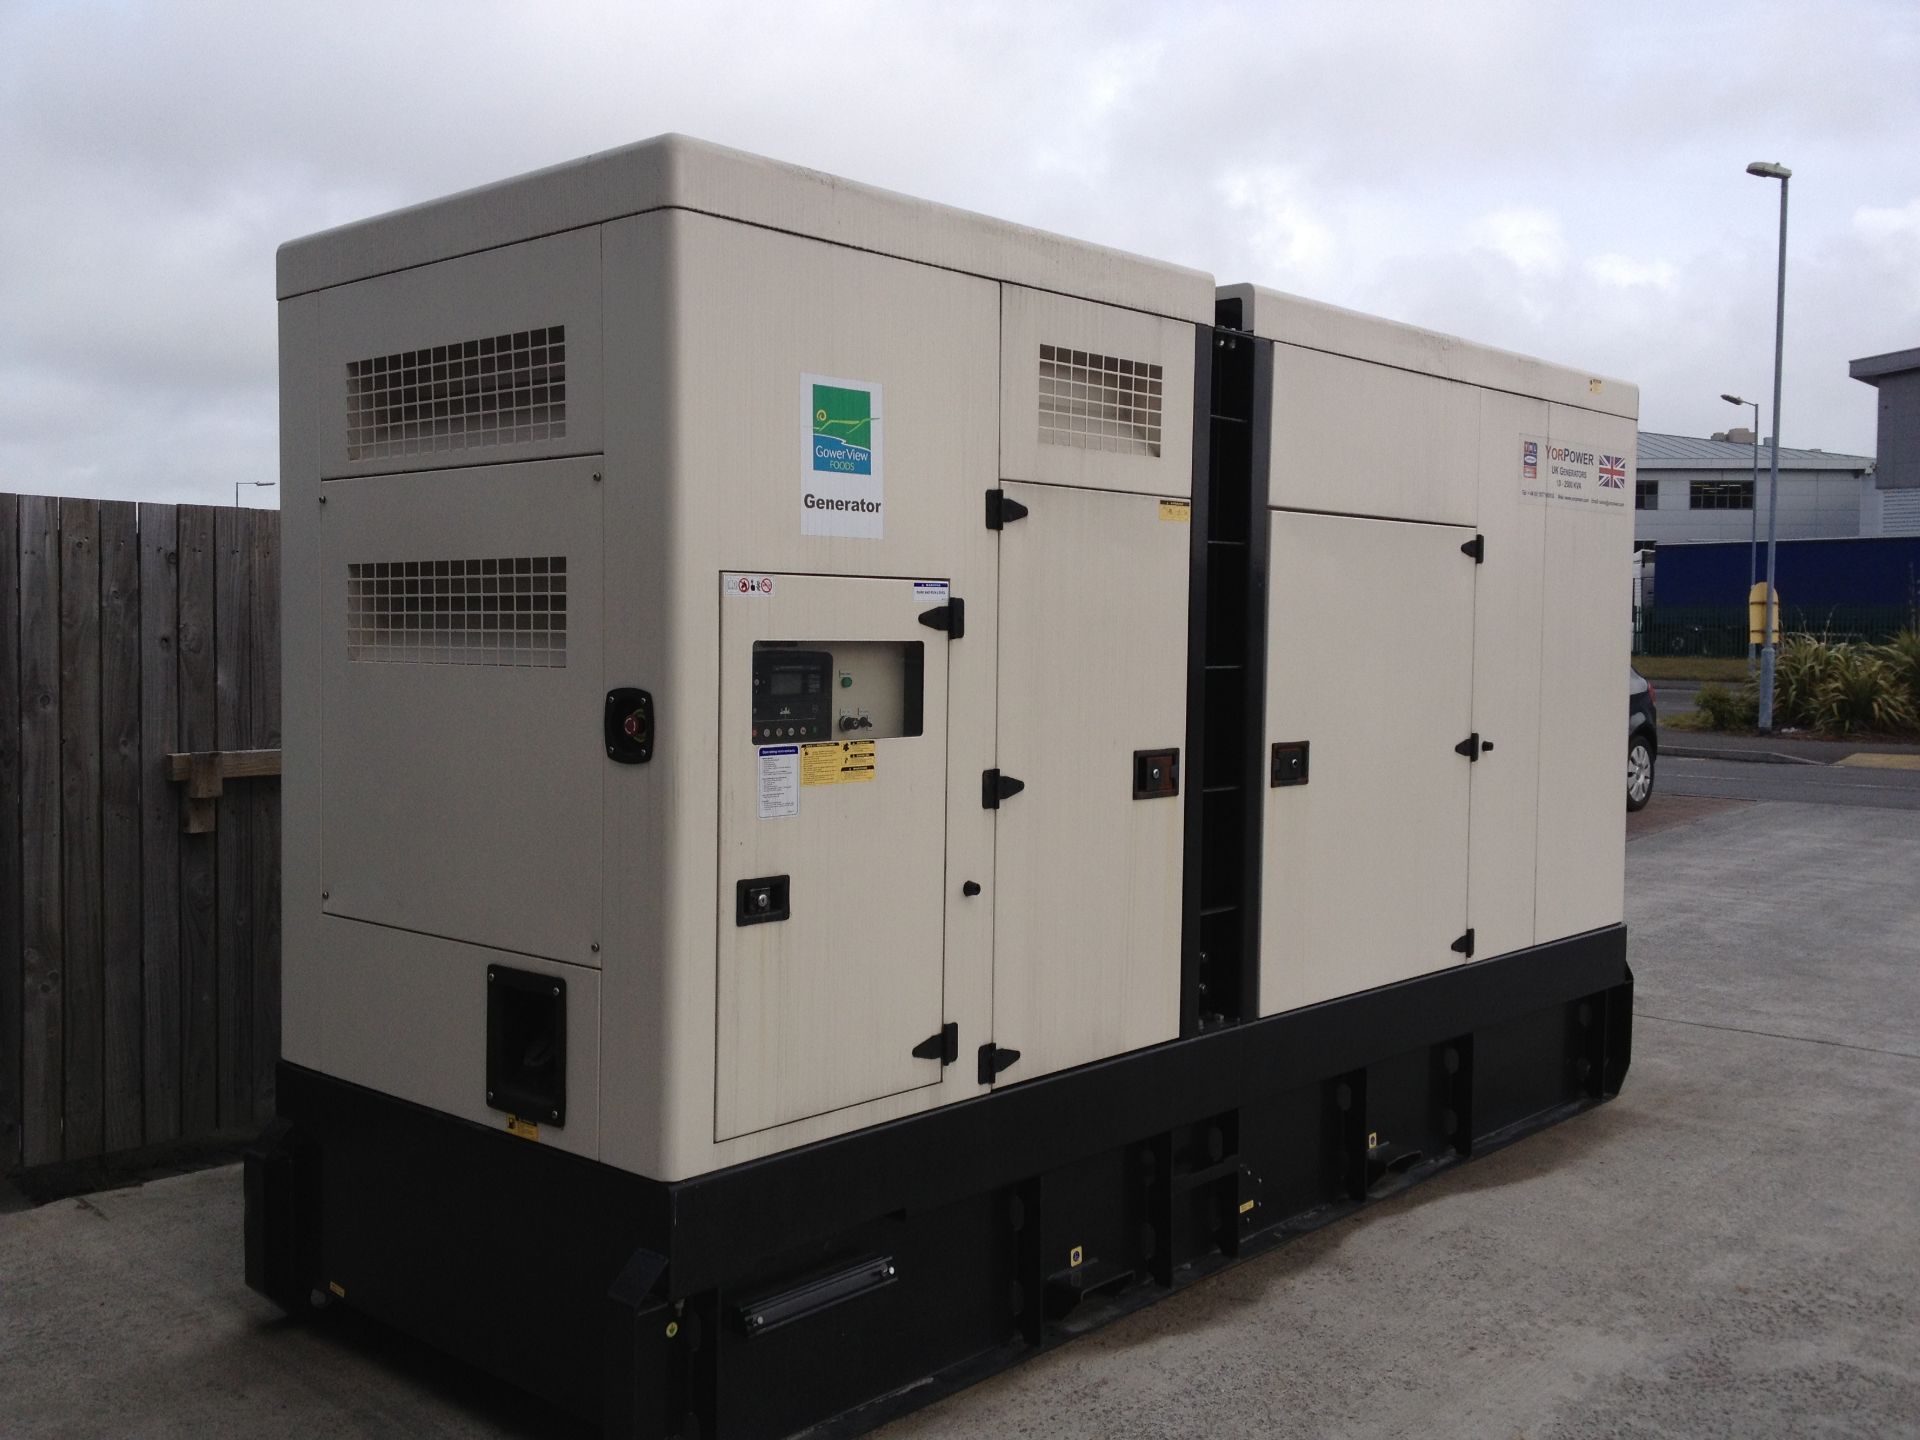 Genset Generator. 350 KVA. The generator has done 336hrs and is a Perkins engine